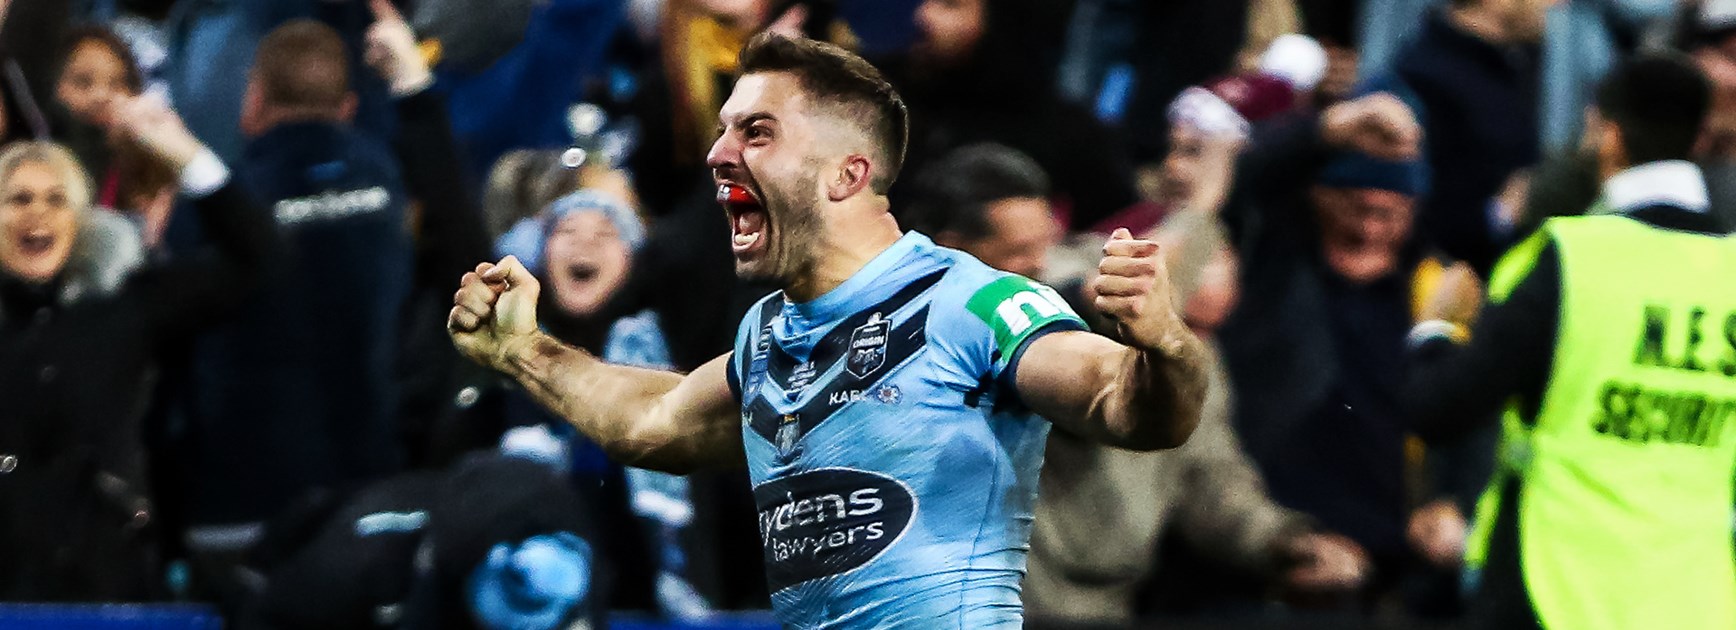 Everything you need to know: Ampol State of Origin 2020